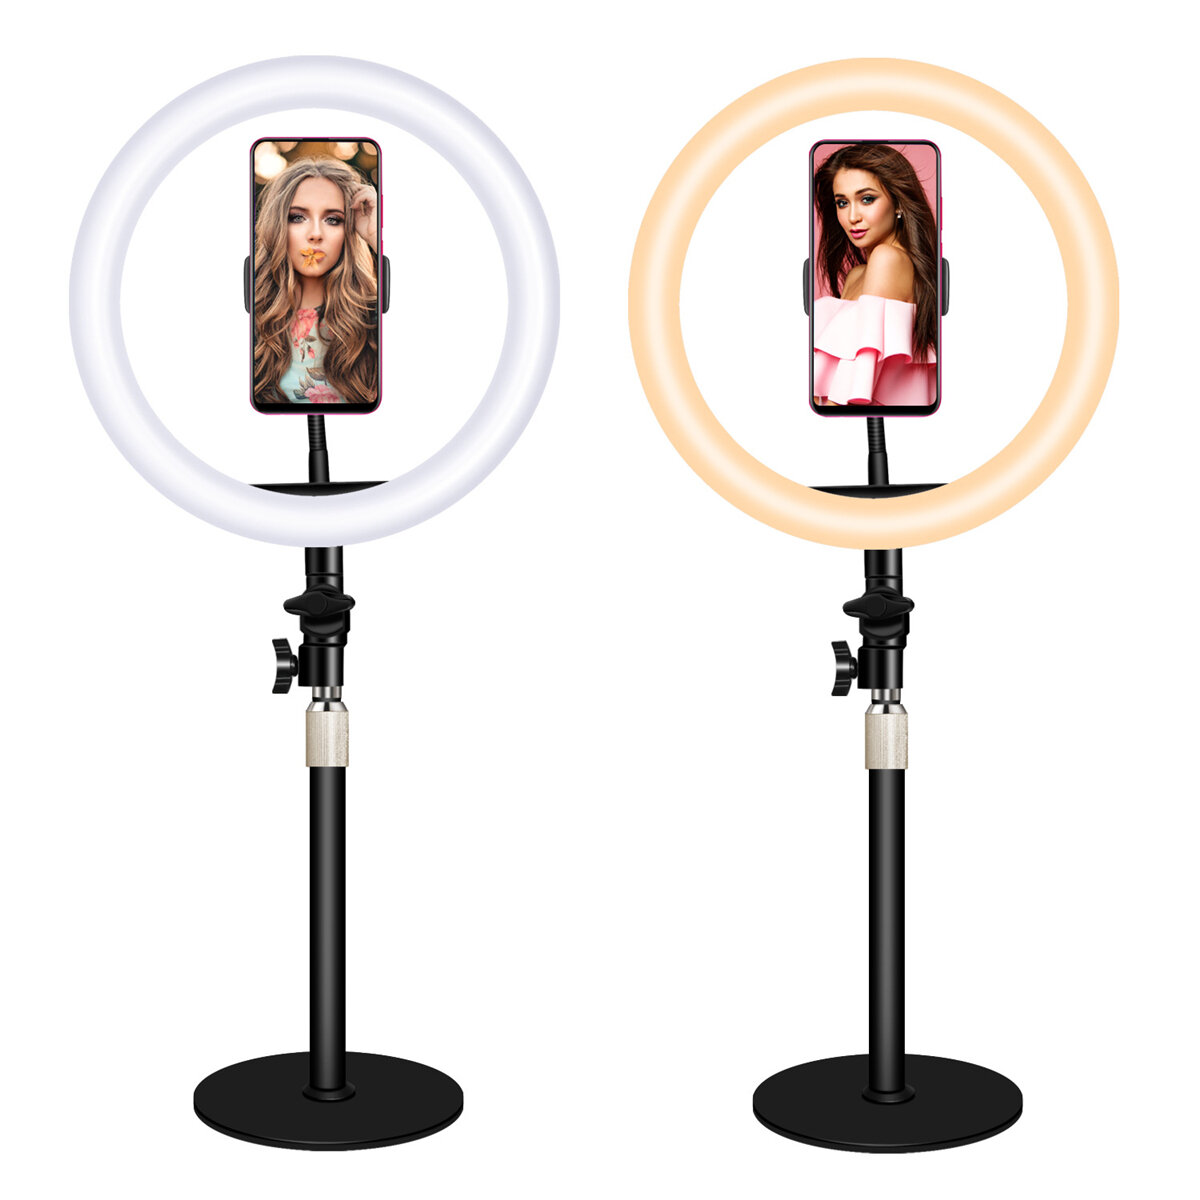 Image of Ring Light Beauty Lamp USB Power Supply Selfie Light with Mobile Phone Stand